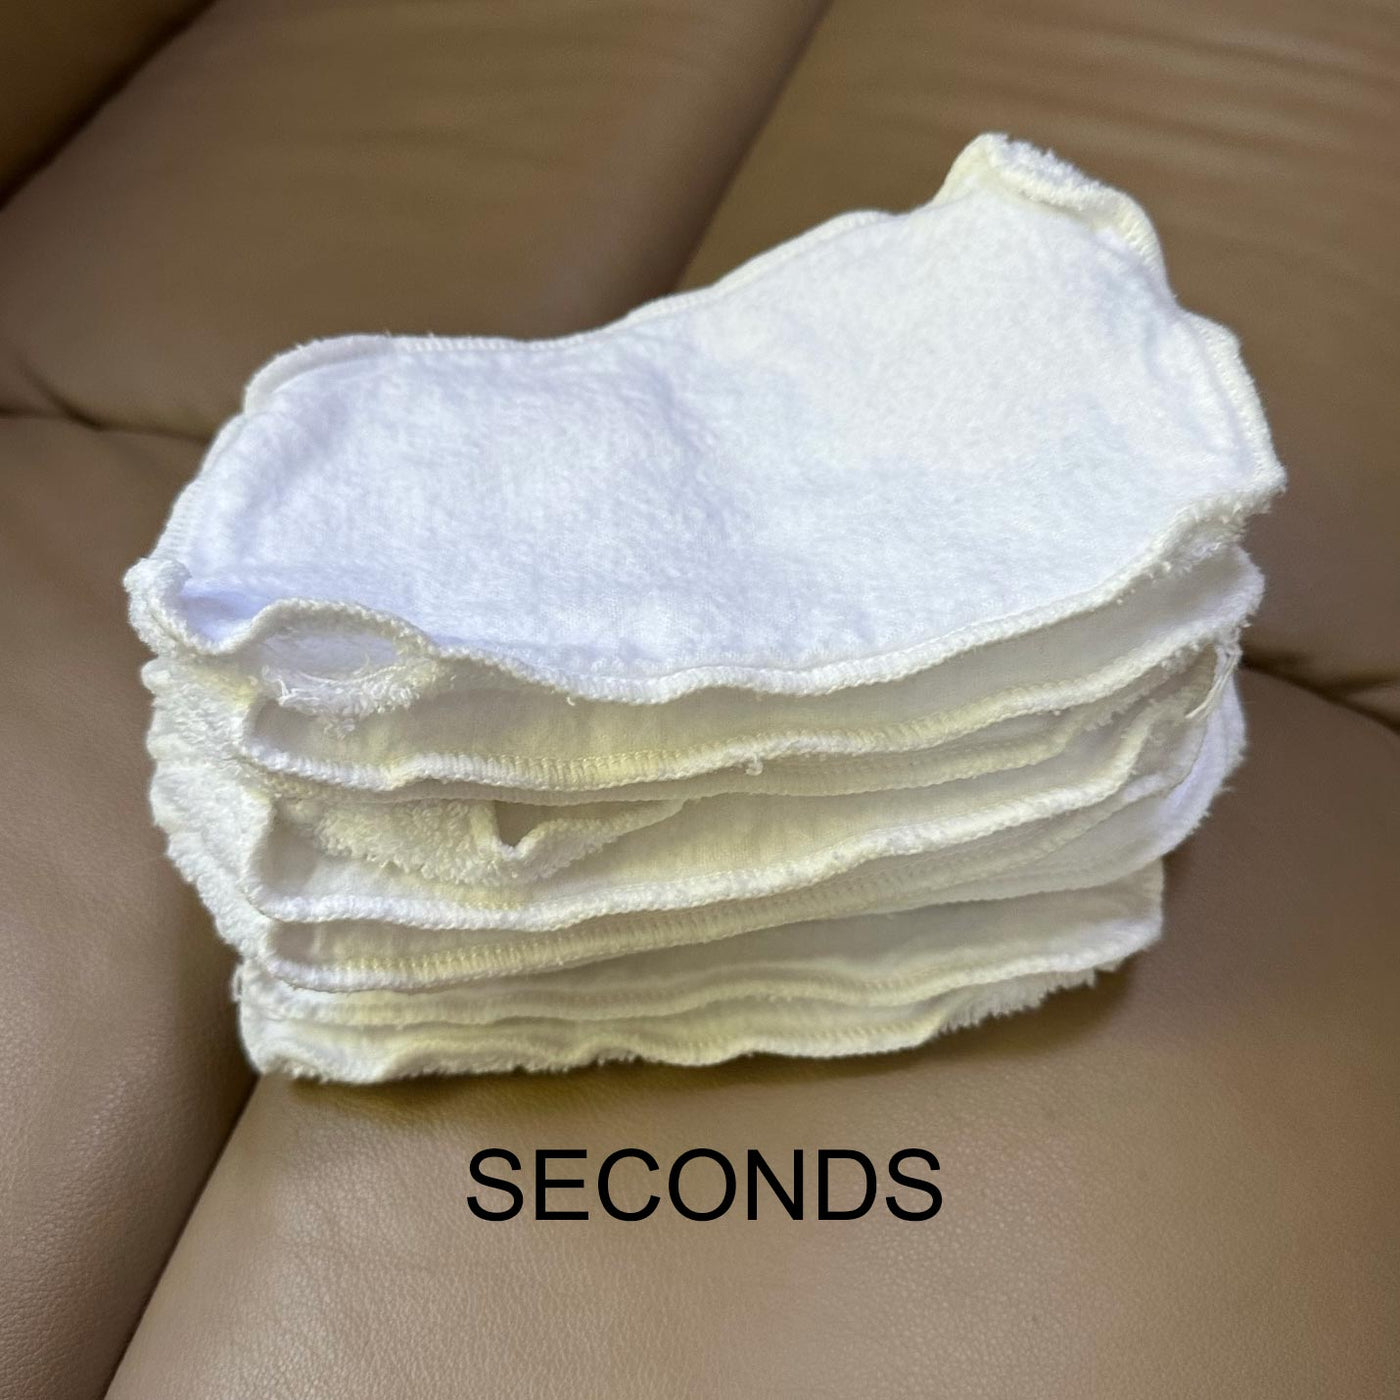 Seconds baby wipes